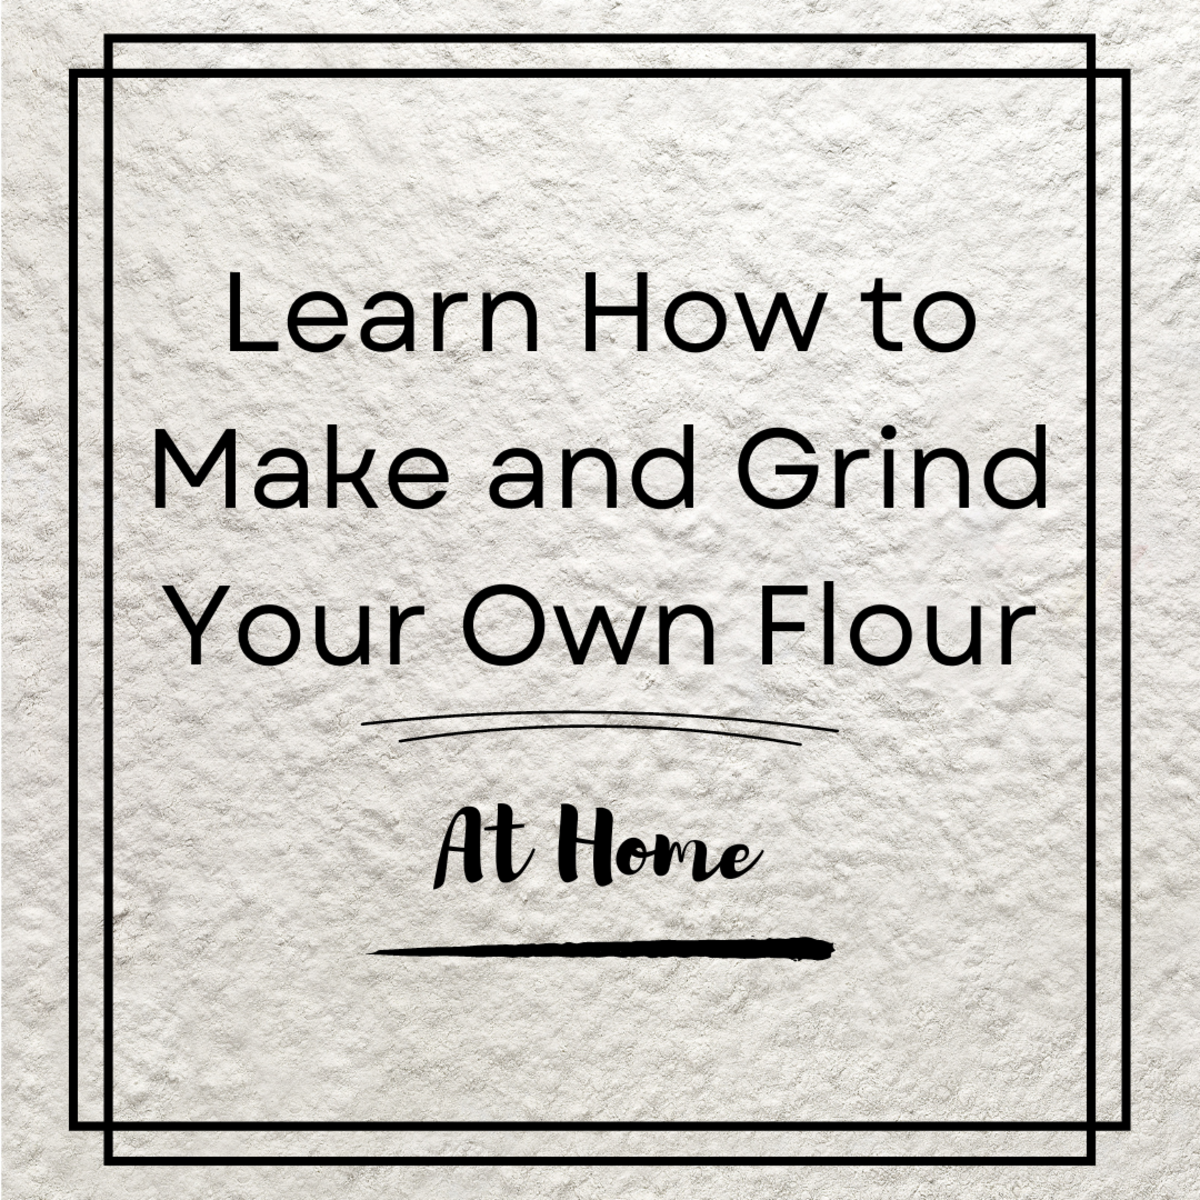 Making and Grinding Flour at Home: Amaranth, Buckwheat, Quinoa, Prickly Pear Cactus Seed, and Other Meals